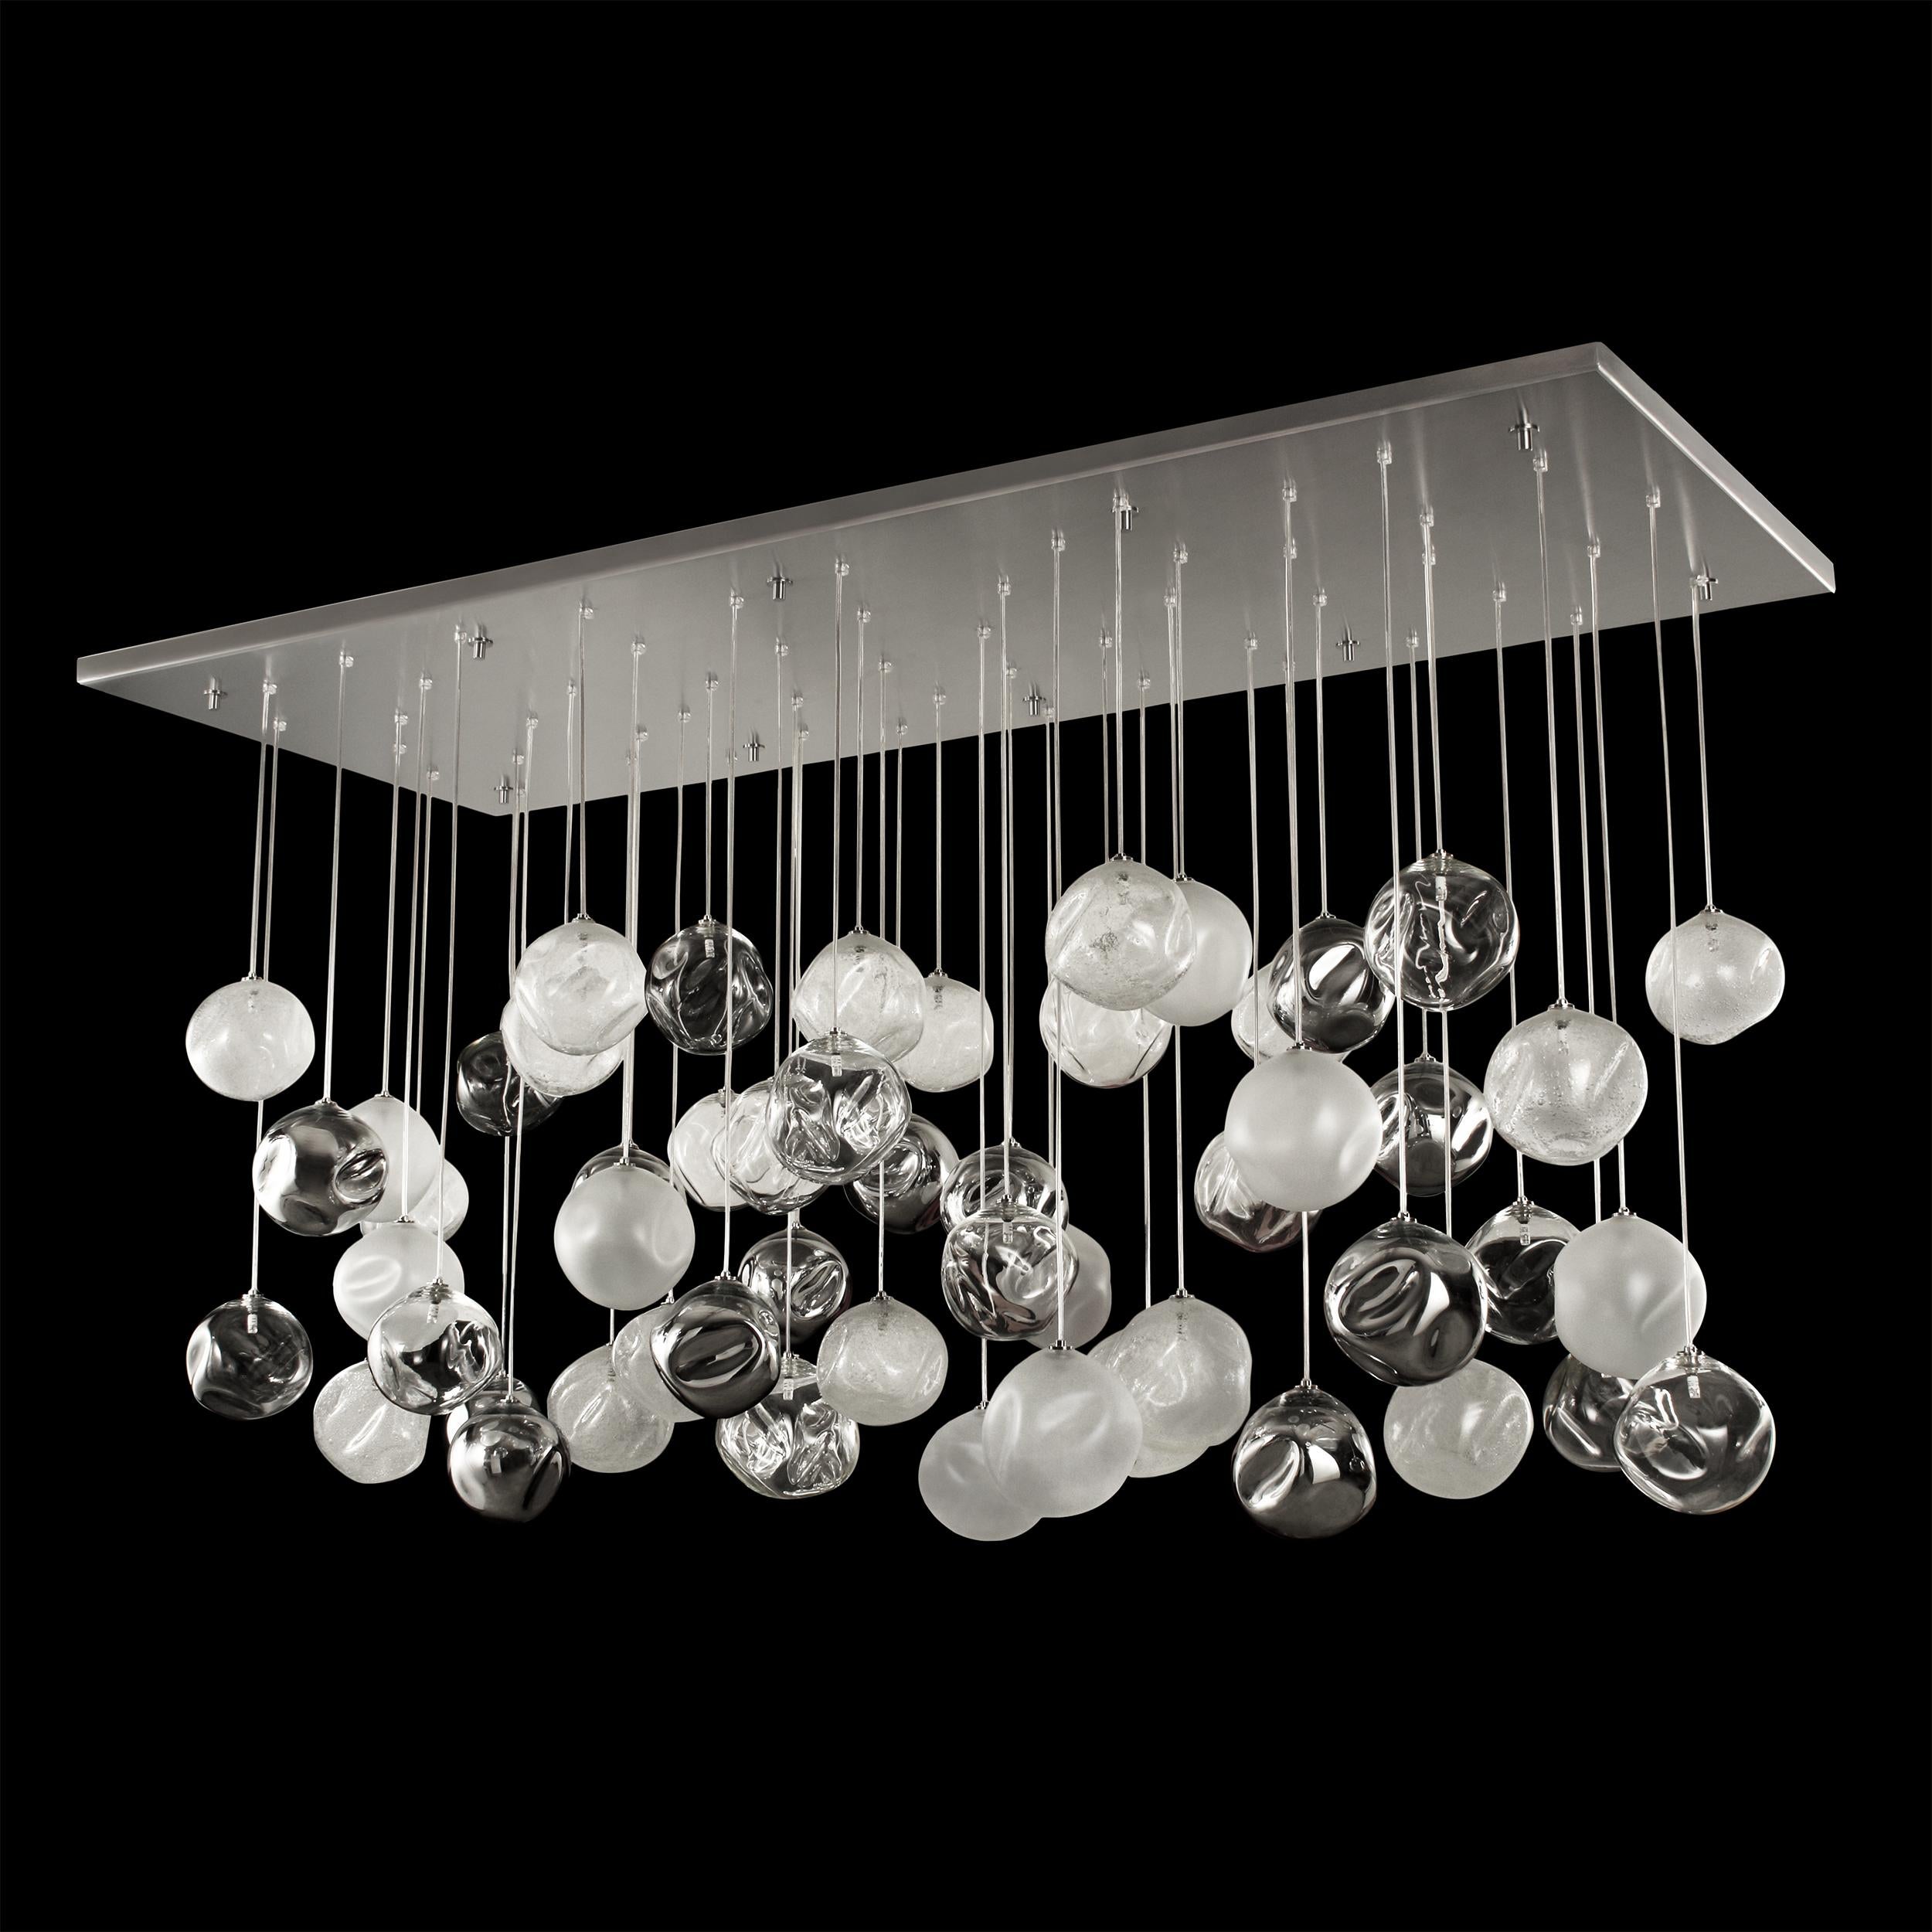 Artistic ceiling lamp, glass spheres in clear, satined, mirrored and pulegoso size 80x200cm
Elegant and unmistakable, suggestive and poetical, soft and delicate are some of the adjectives that can be used to describe the blown glass ball chandelier